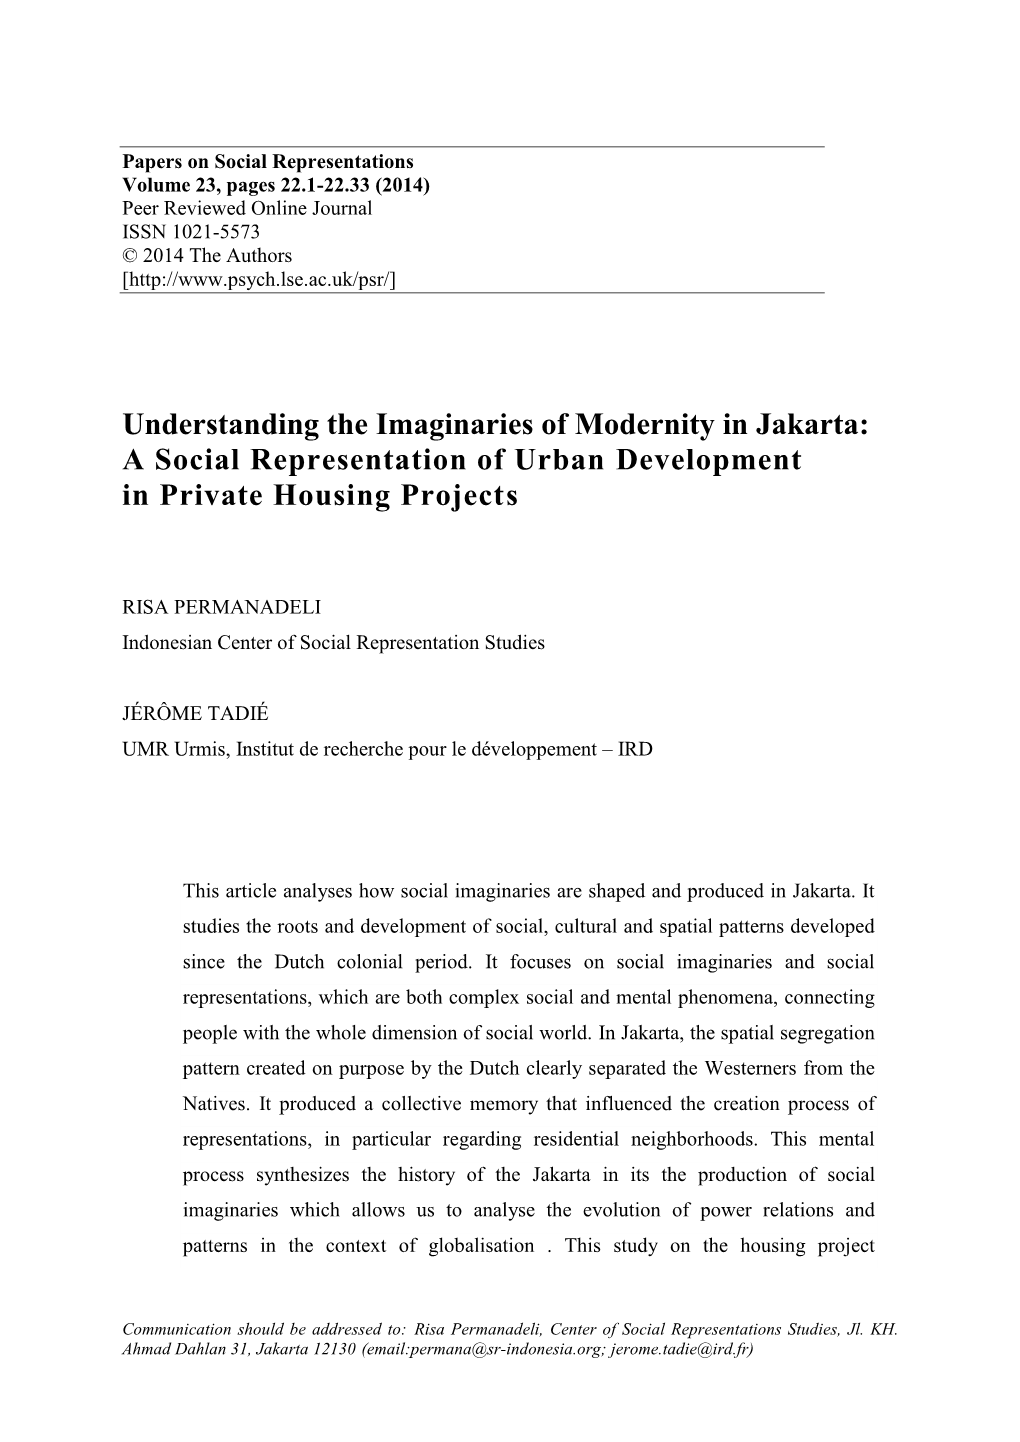 Understanding the Imaginaries of Modernity in Jakarta: a Social Representation of Urban Development in Private Housing Projects